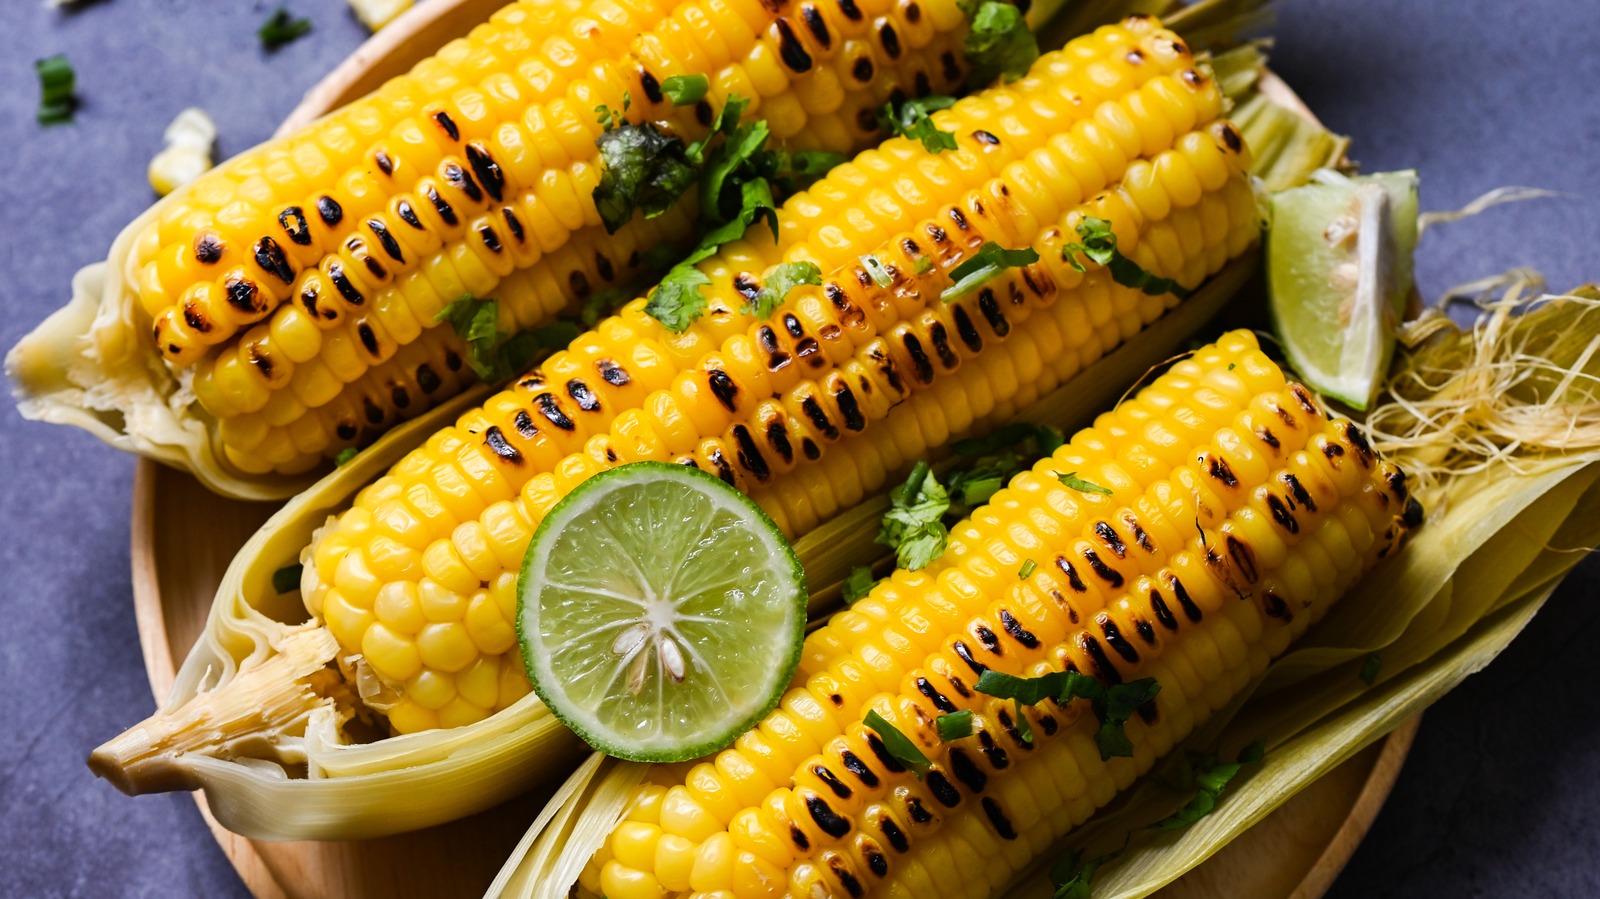 The Tastiest Corn On The Cob Is Grilled With The Husk On